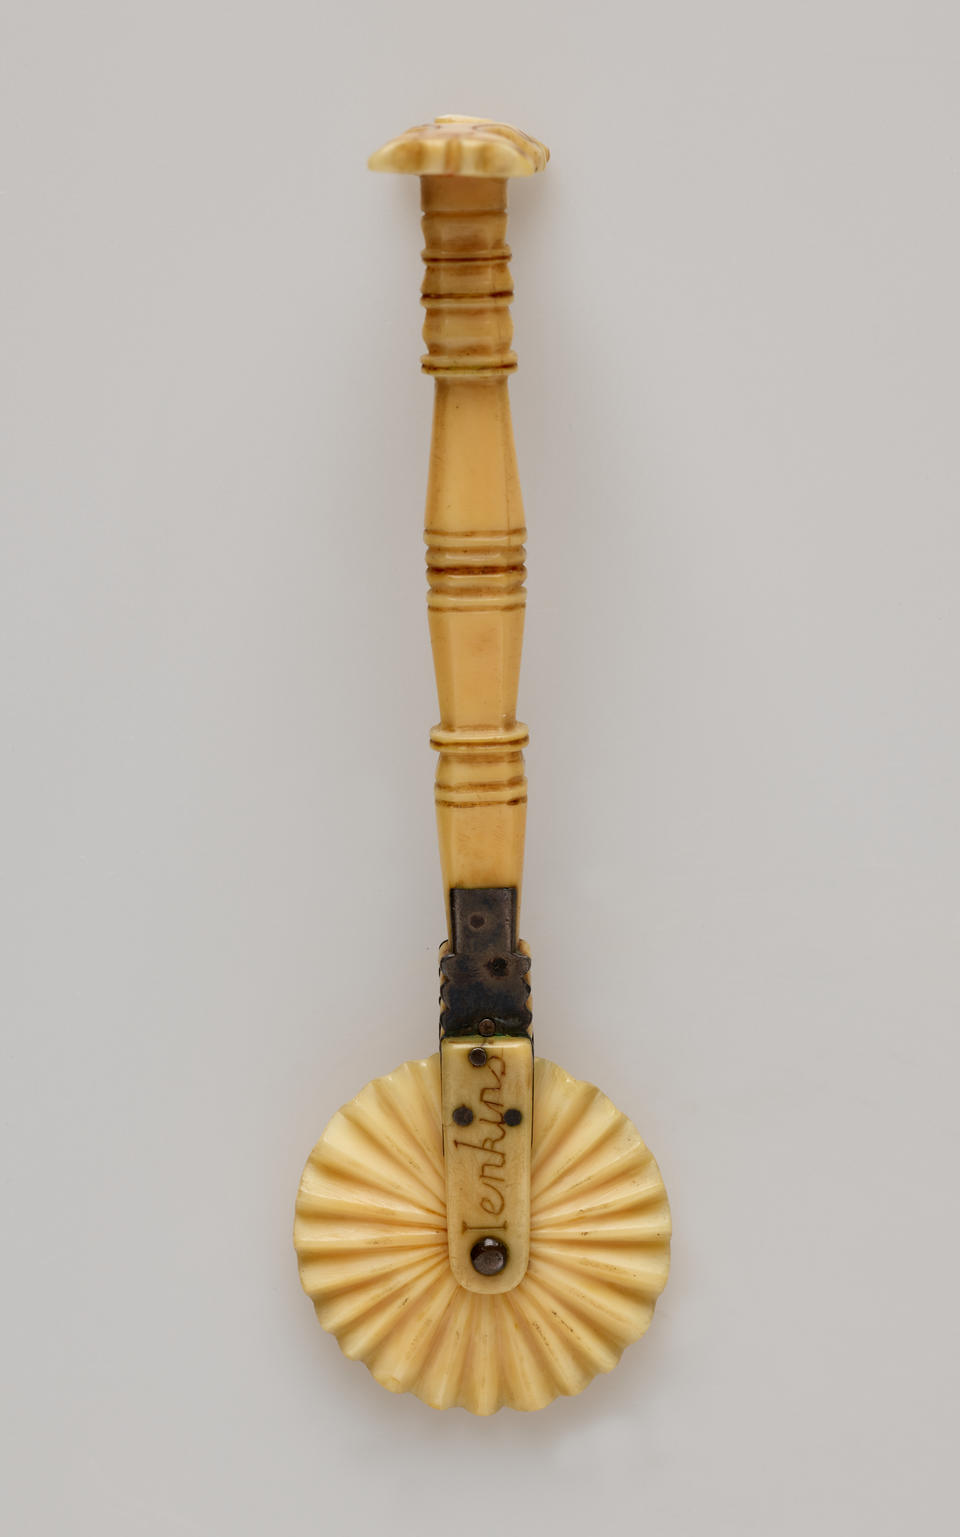 An ivory pie crimper with a decorative handle and a textured wheel. There are letters on the part attaching the wheel to the handle.